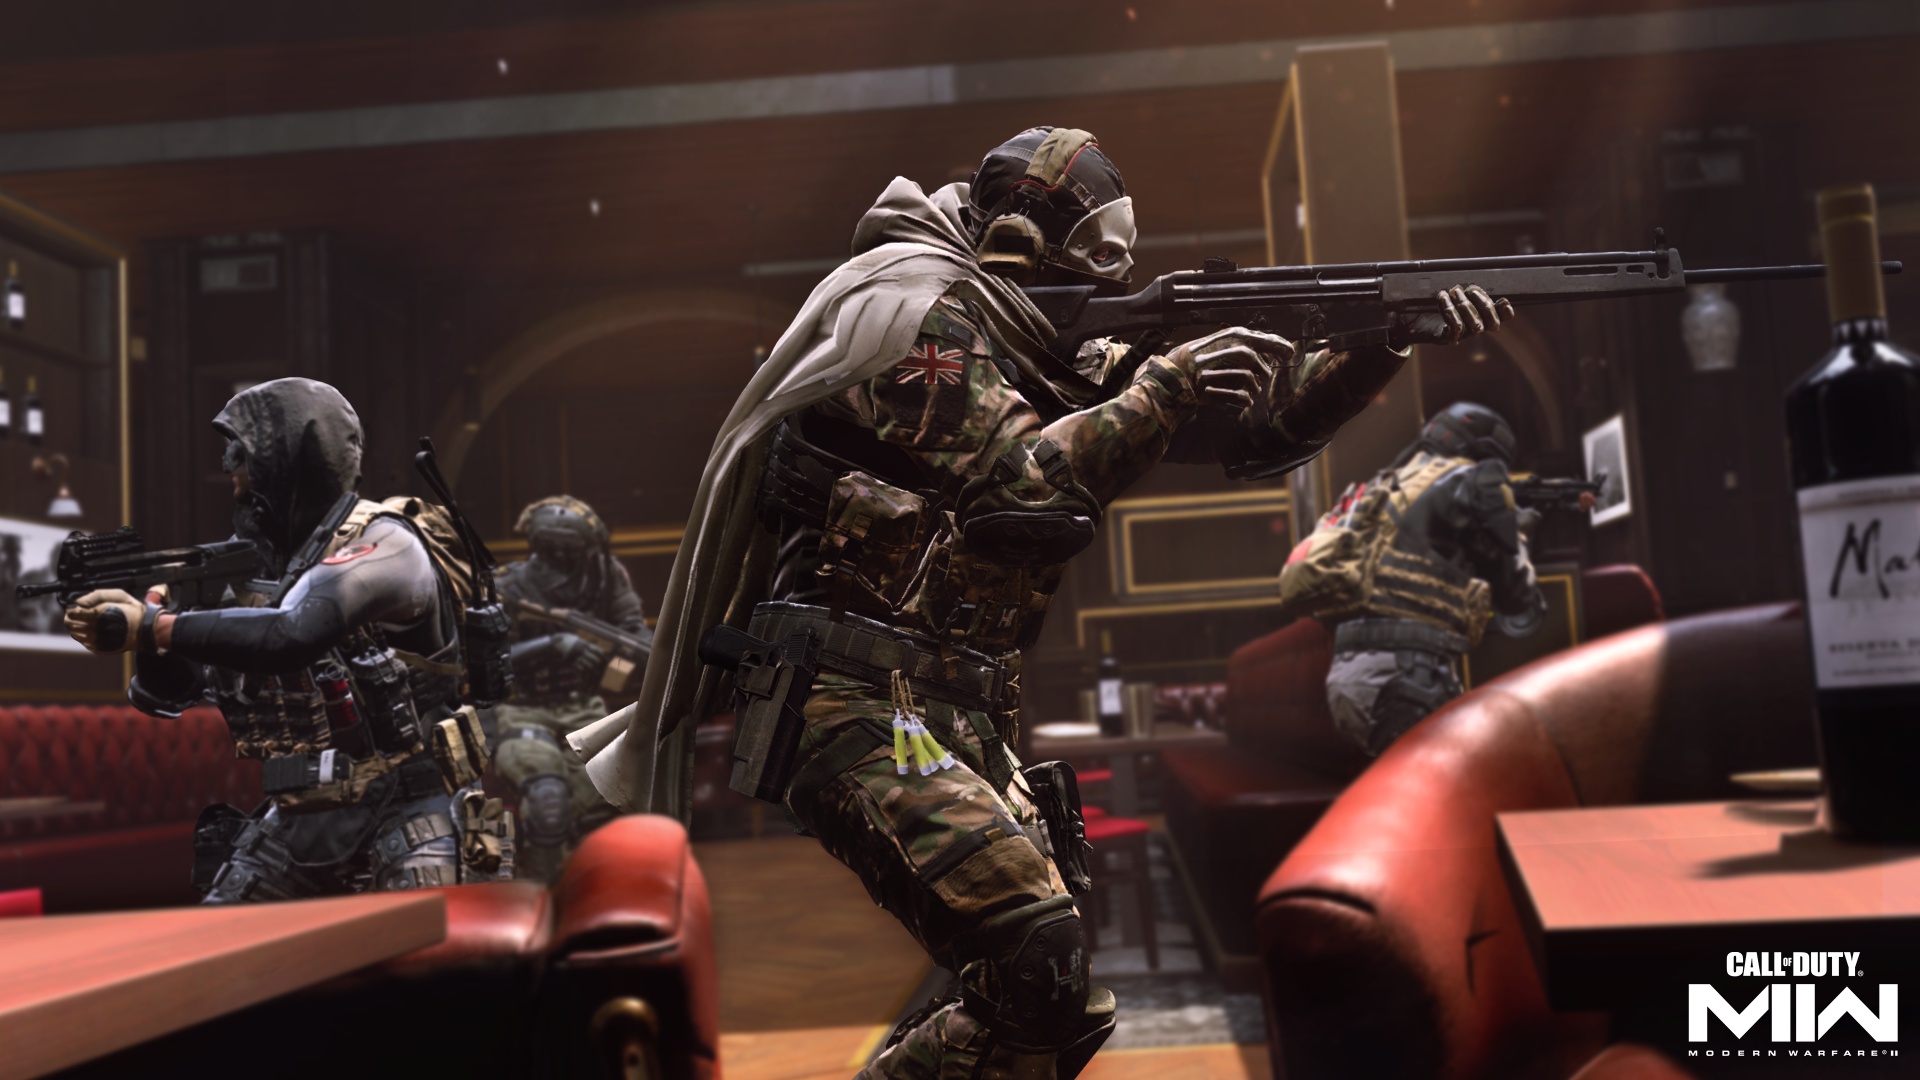 Win A Call Of Duty: Modern Warfare II Beta Code With Android